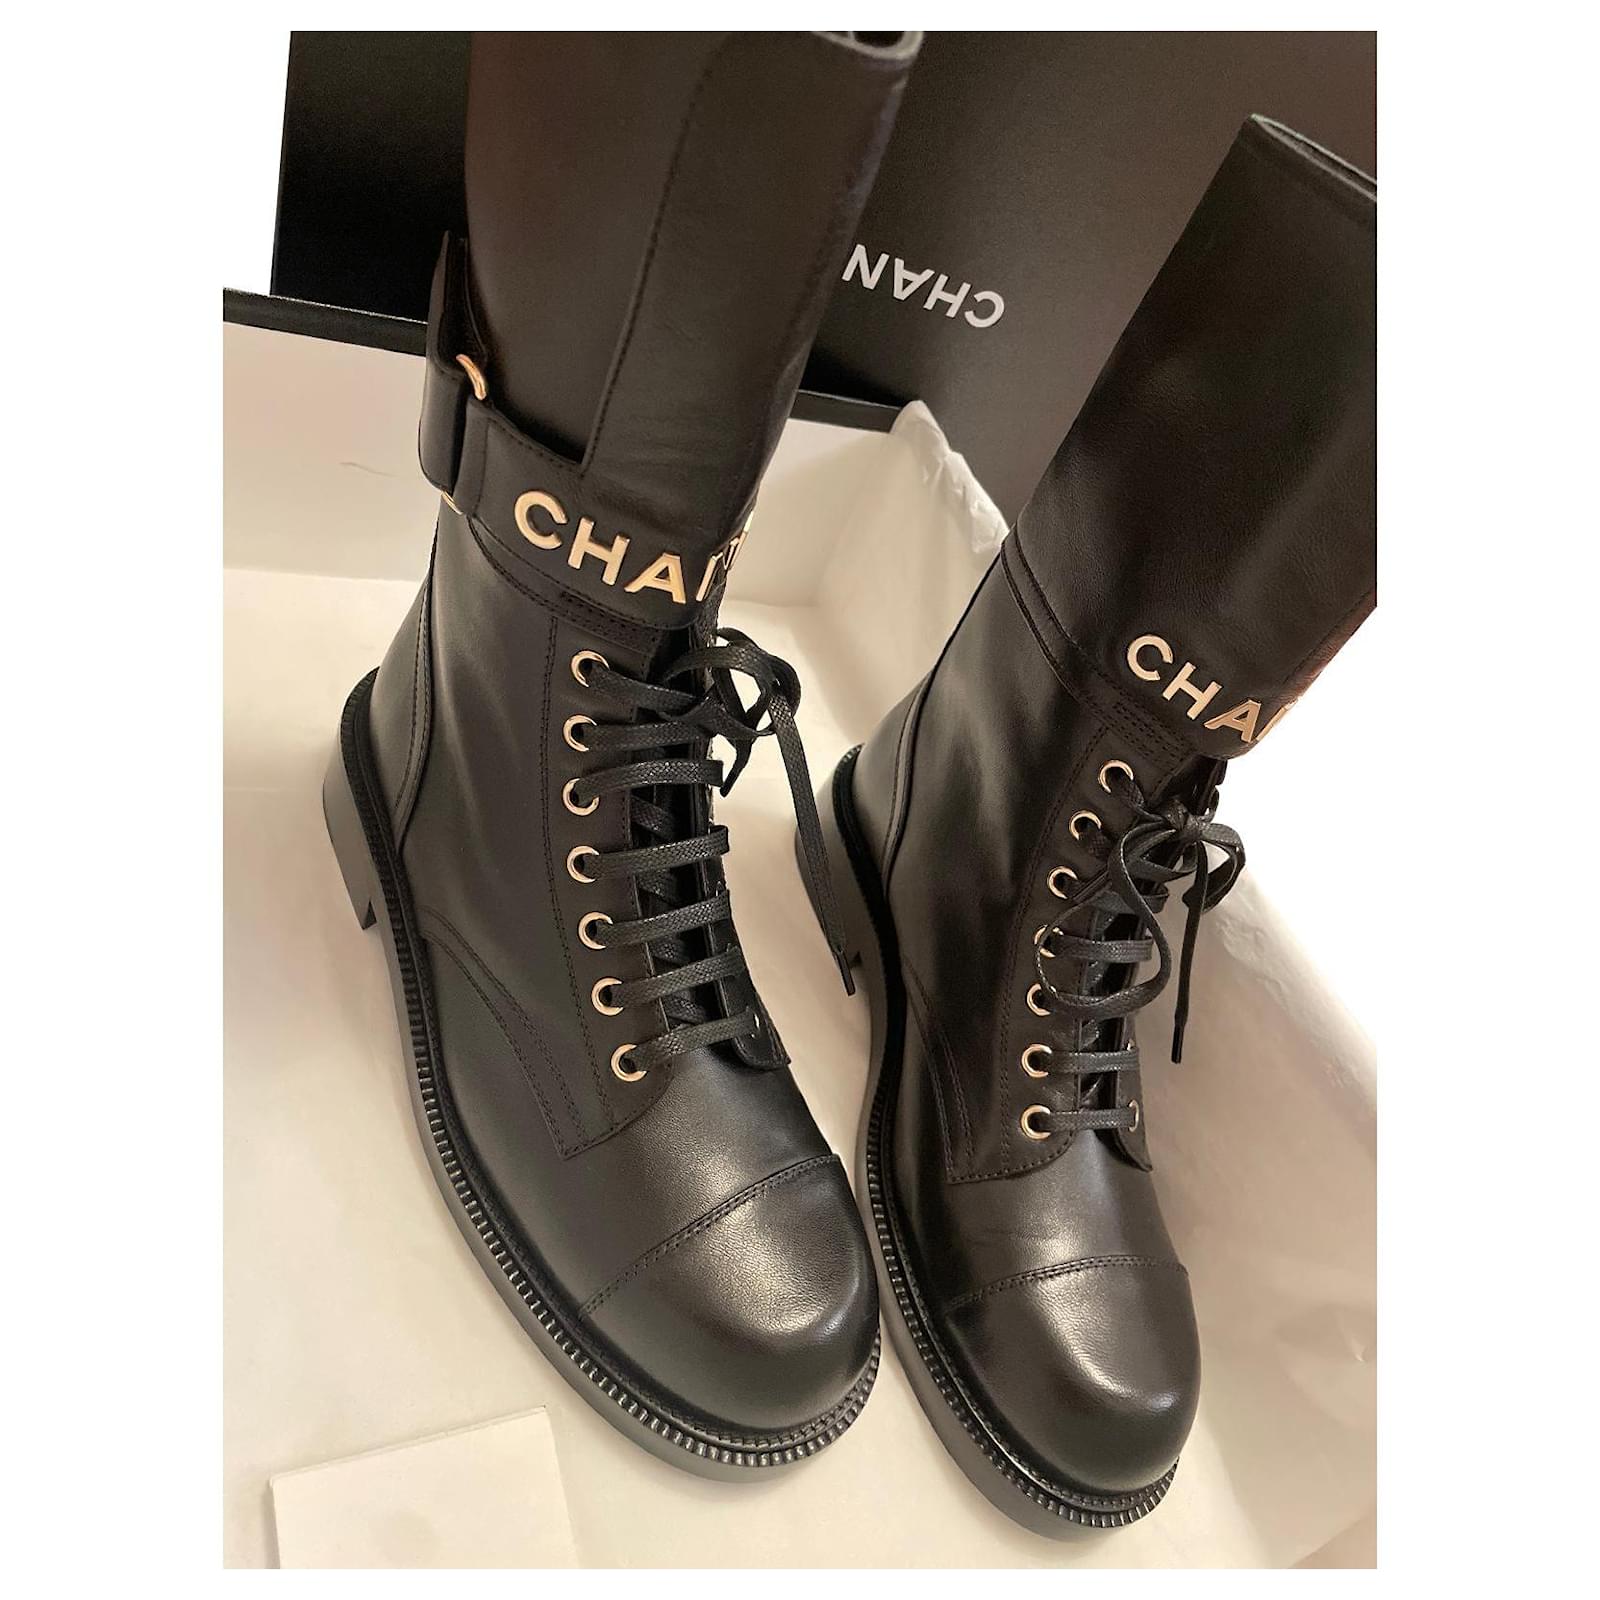 Chanel  Chanel winter boots, Boots, Chanel boots